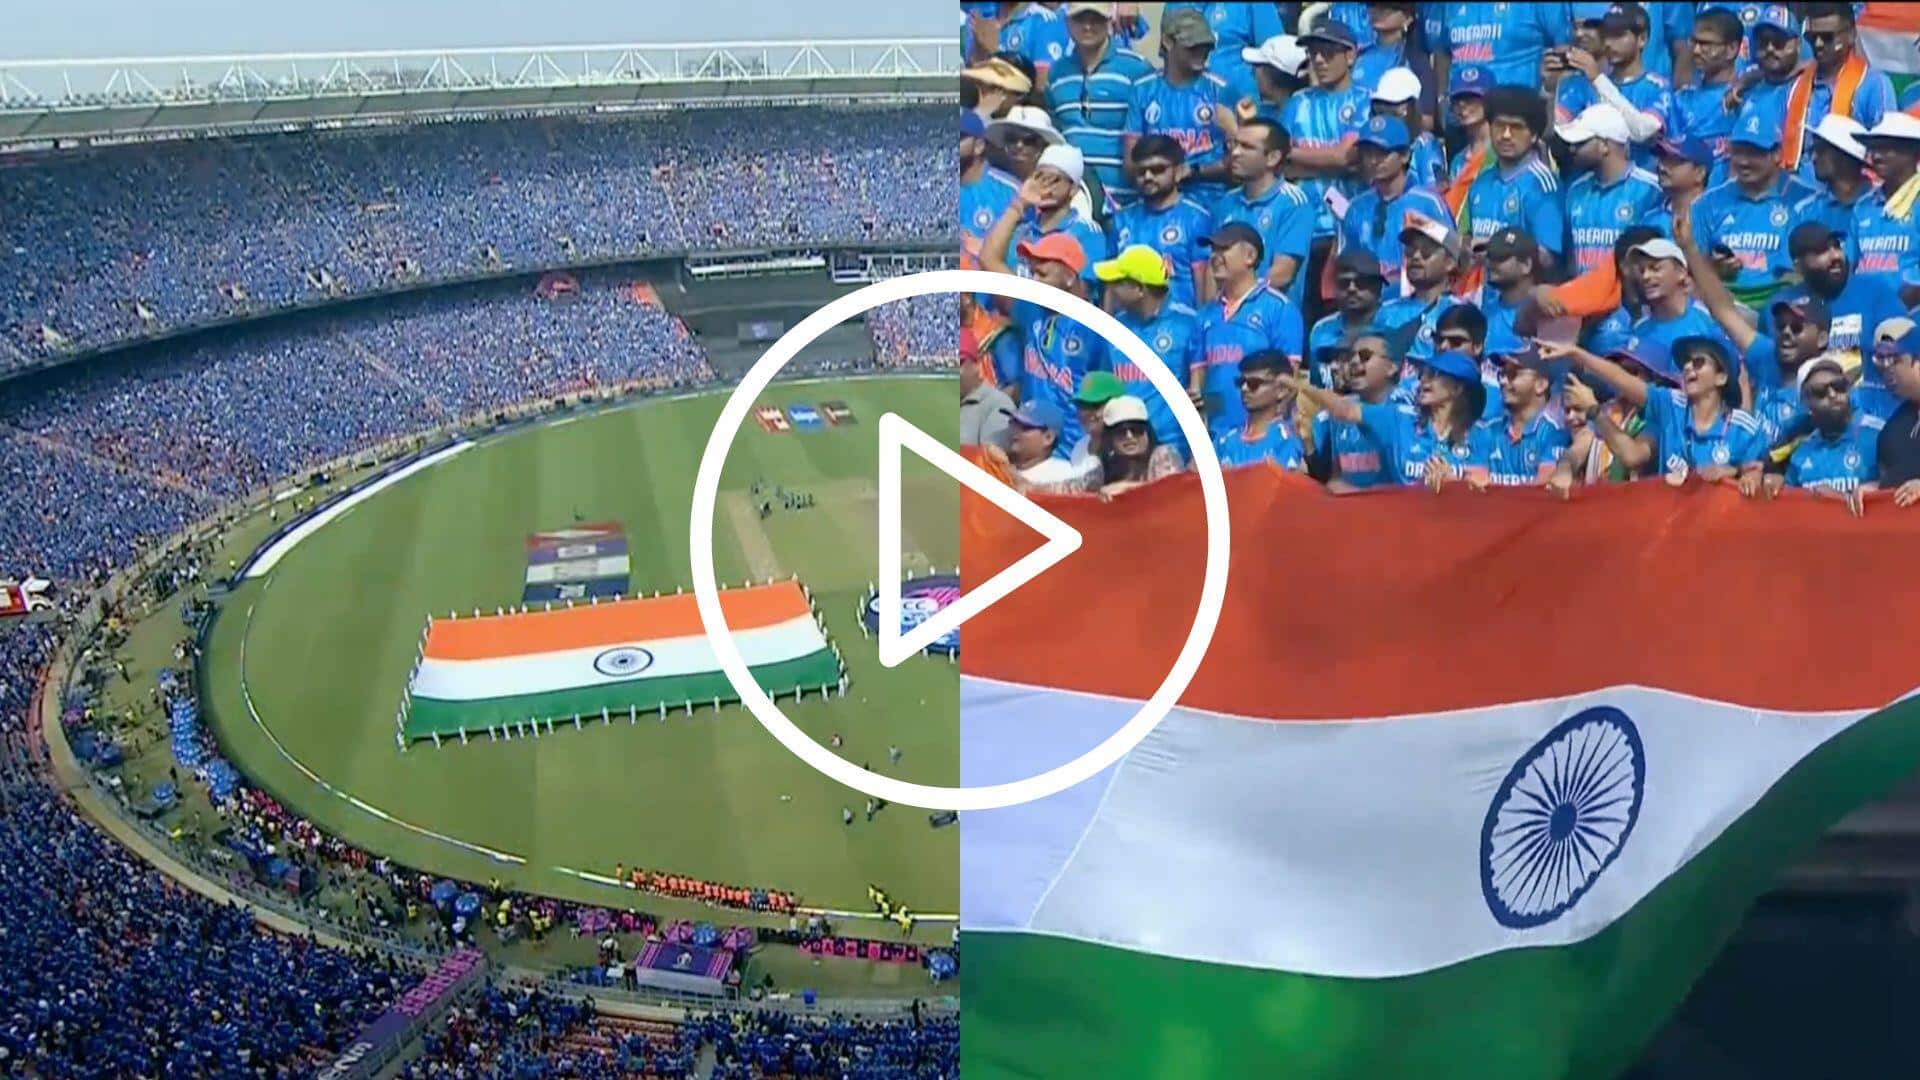 [Watch] 'Sea Of Blue' Getting 'Goosebumps'; Over 1 Lakh Sing India’s National Anthem